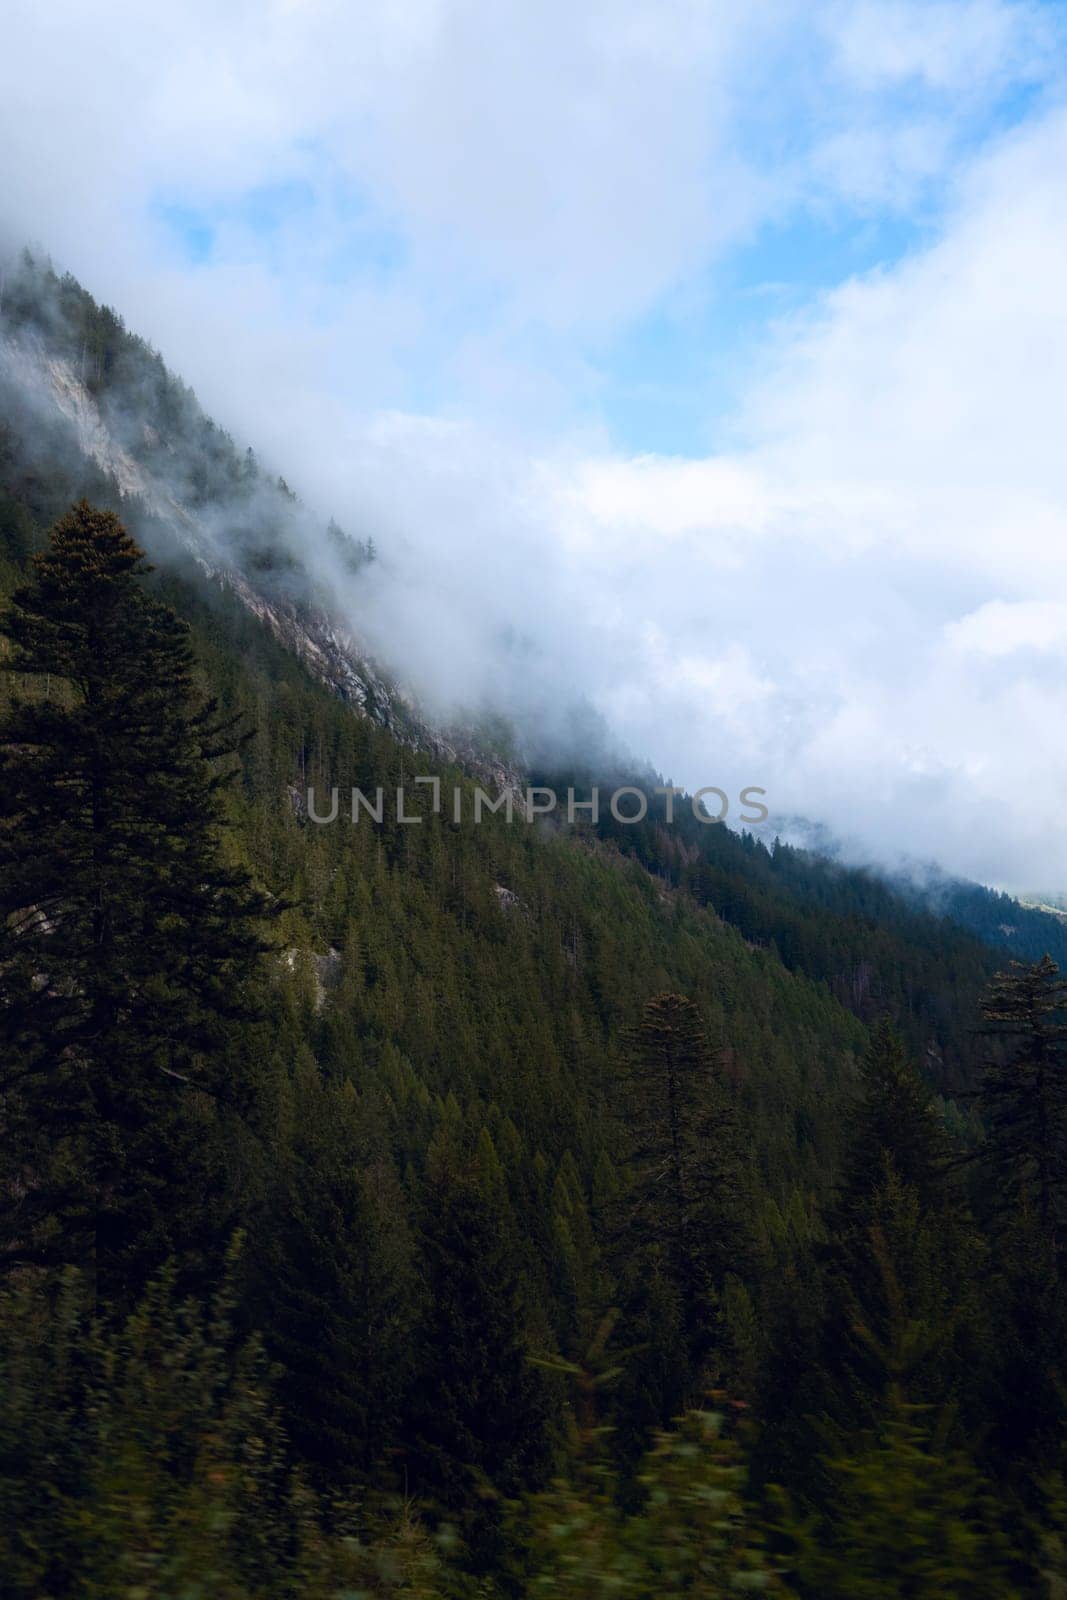 Ascending Tranquility: Pine Trees and Mountain Mist Paint a Serene Alpine Landscape. High quality photo